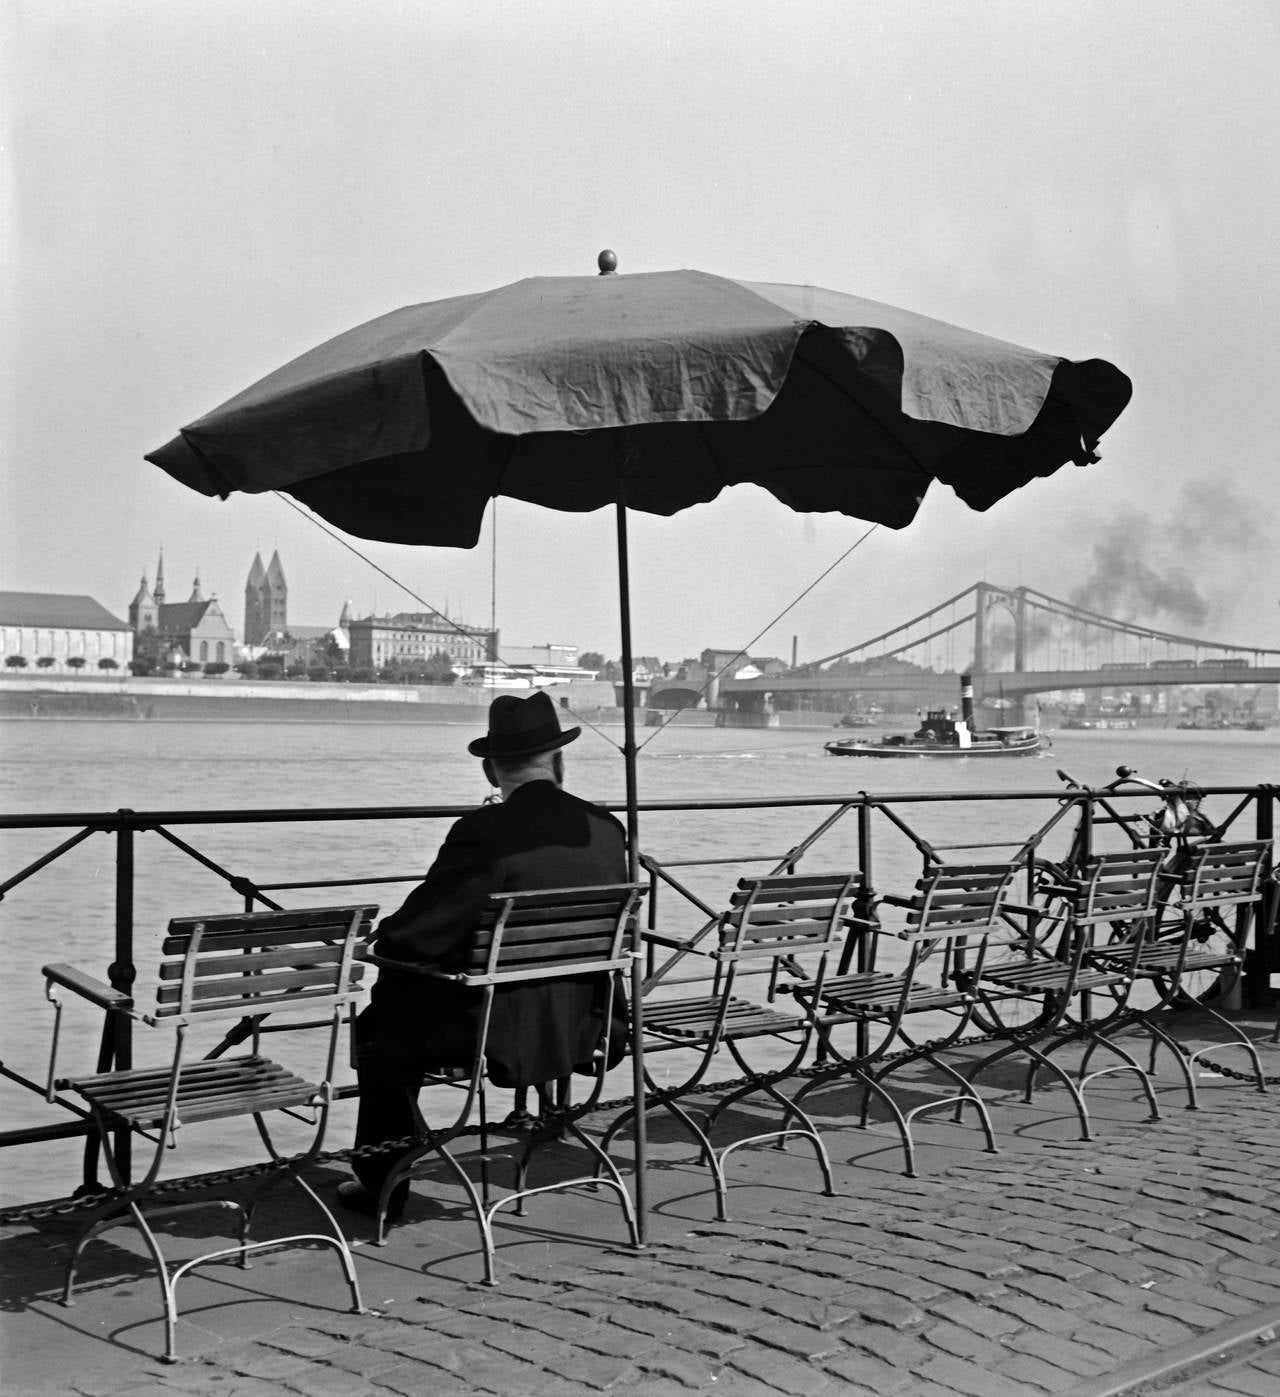 Karl Heinrich Lämmel Black and White Photograph - Man by the Rhine, Cologne, 1935, Printed Later